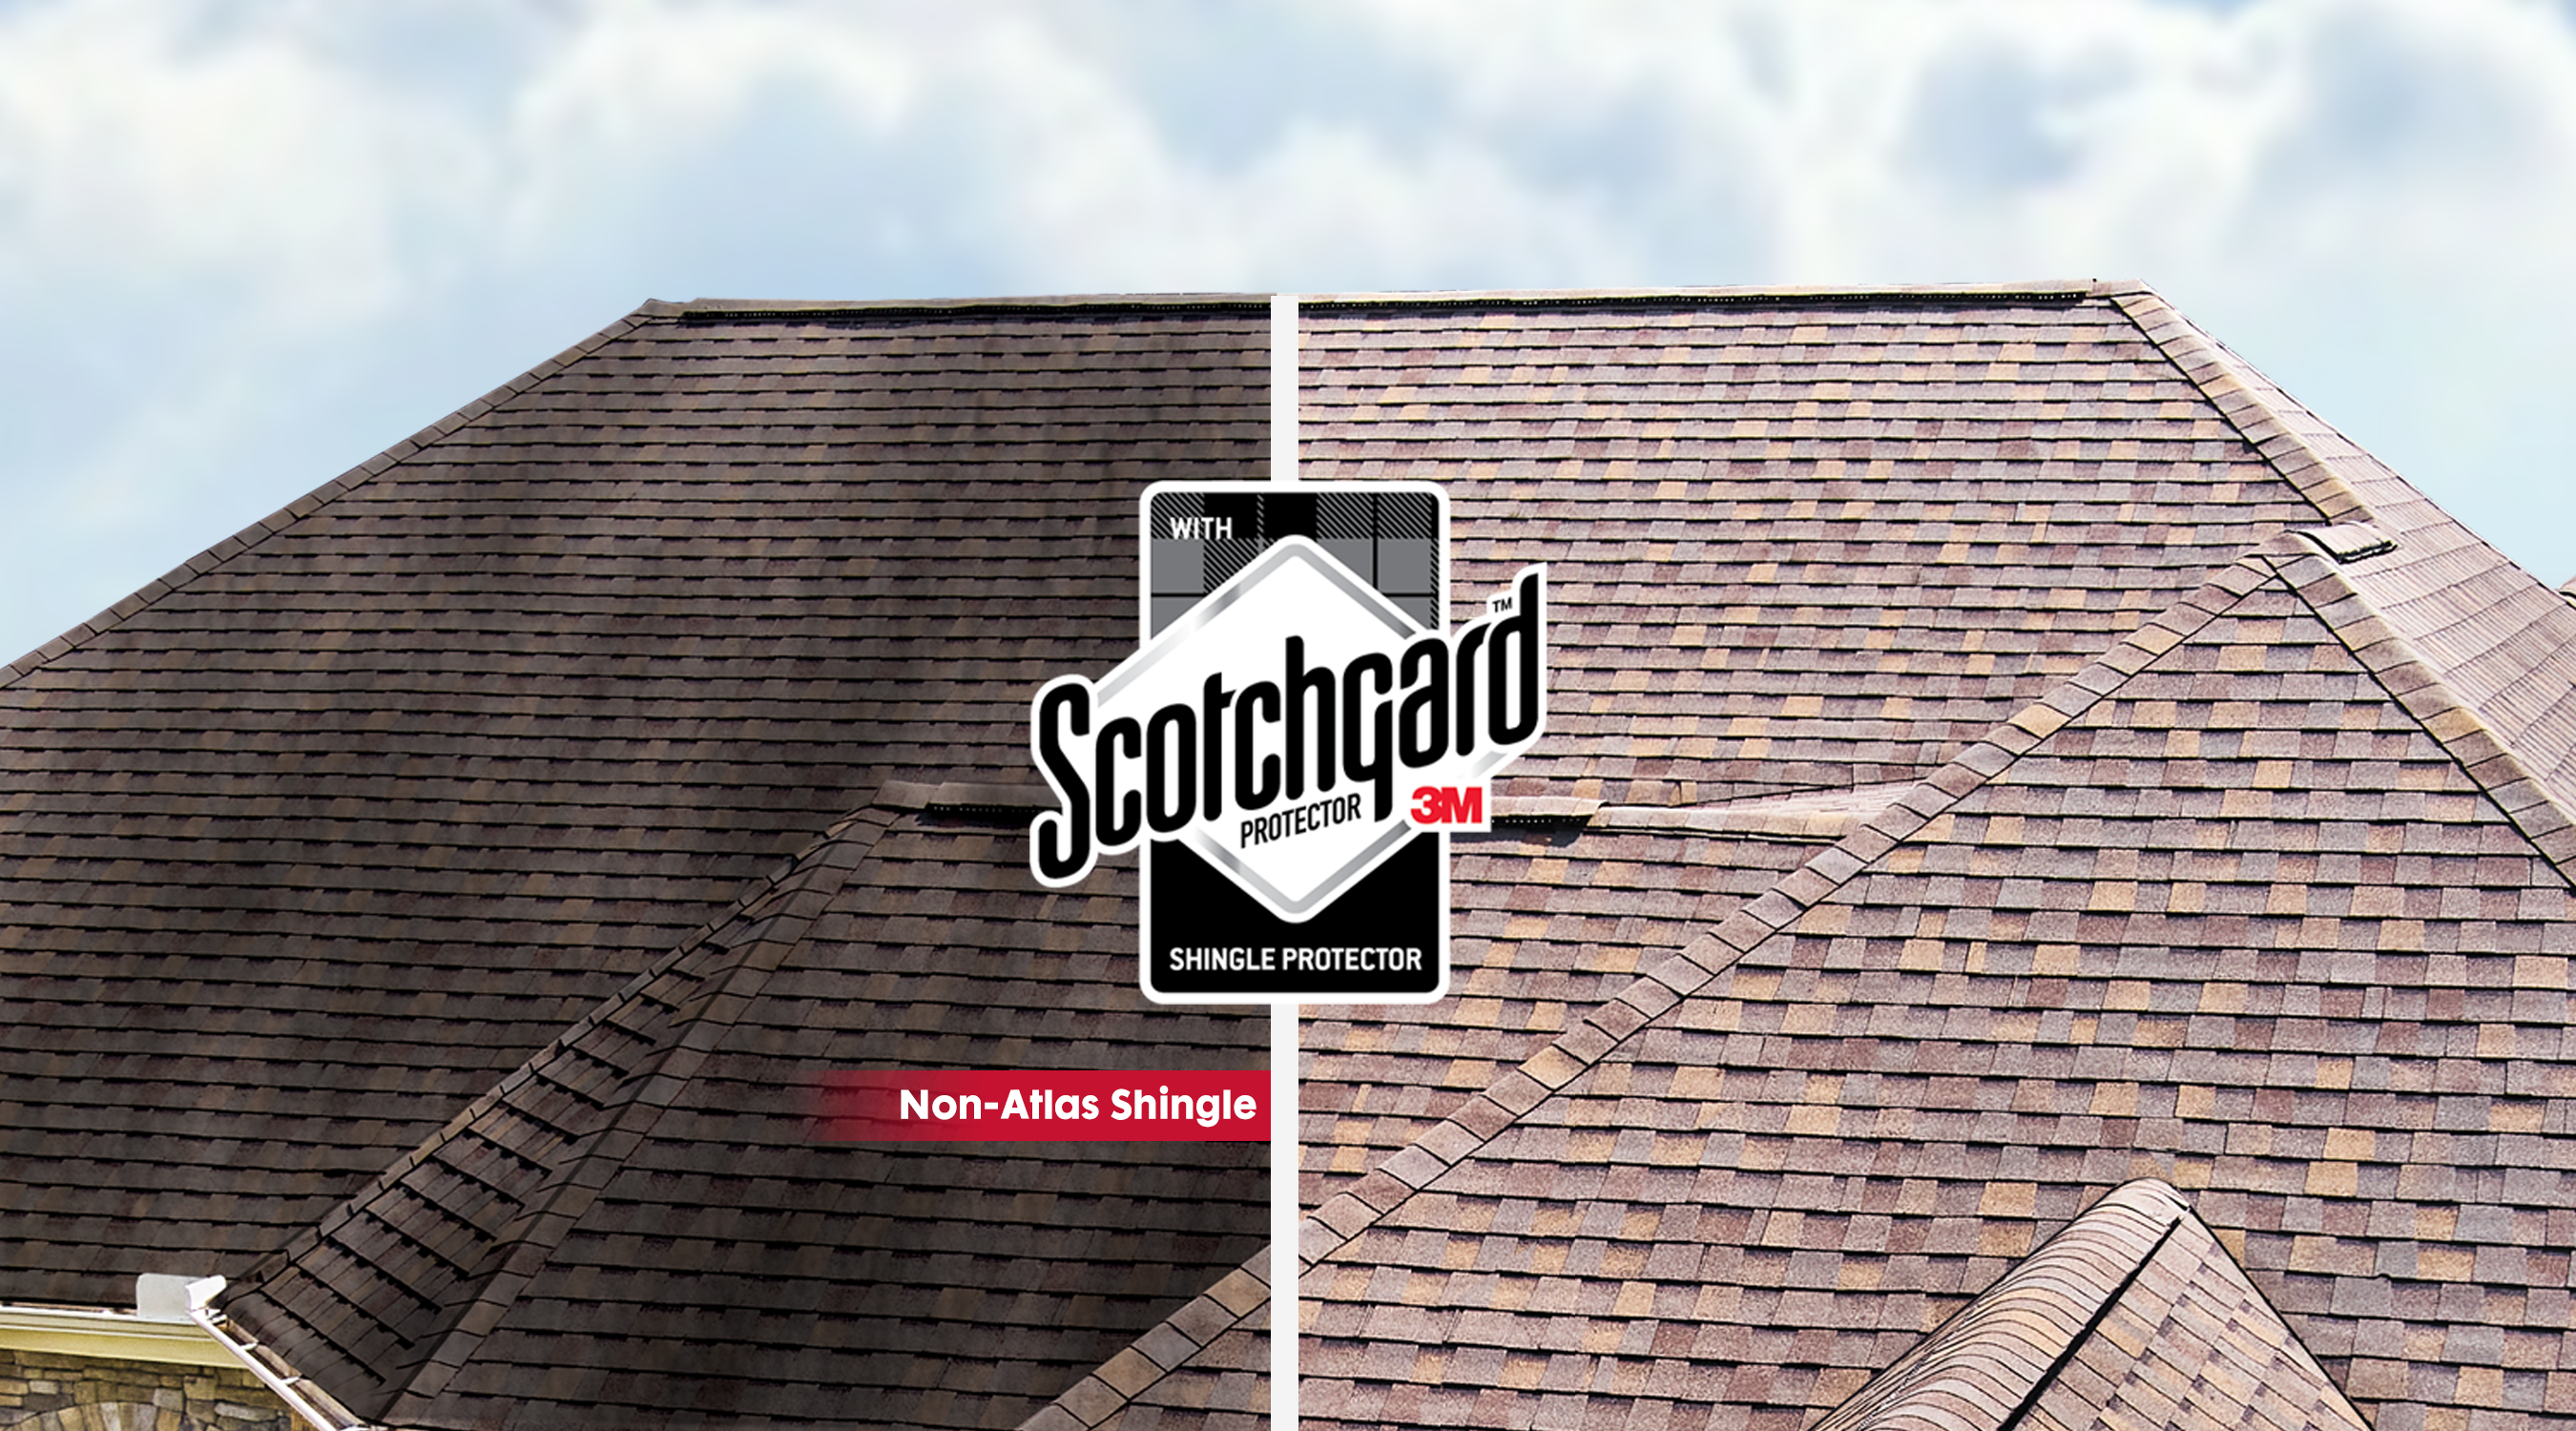 A side-by-side of a roof with Scotchgard algae protection vs. a roof without.